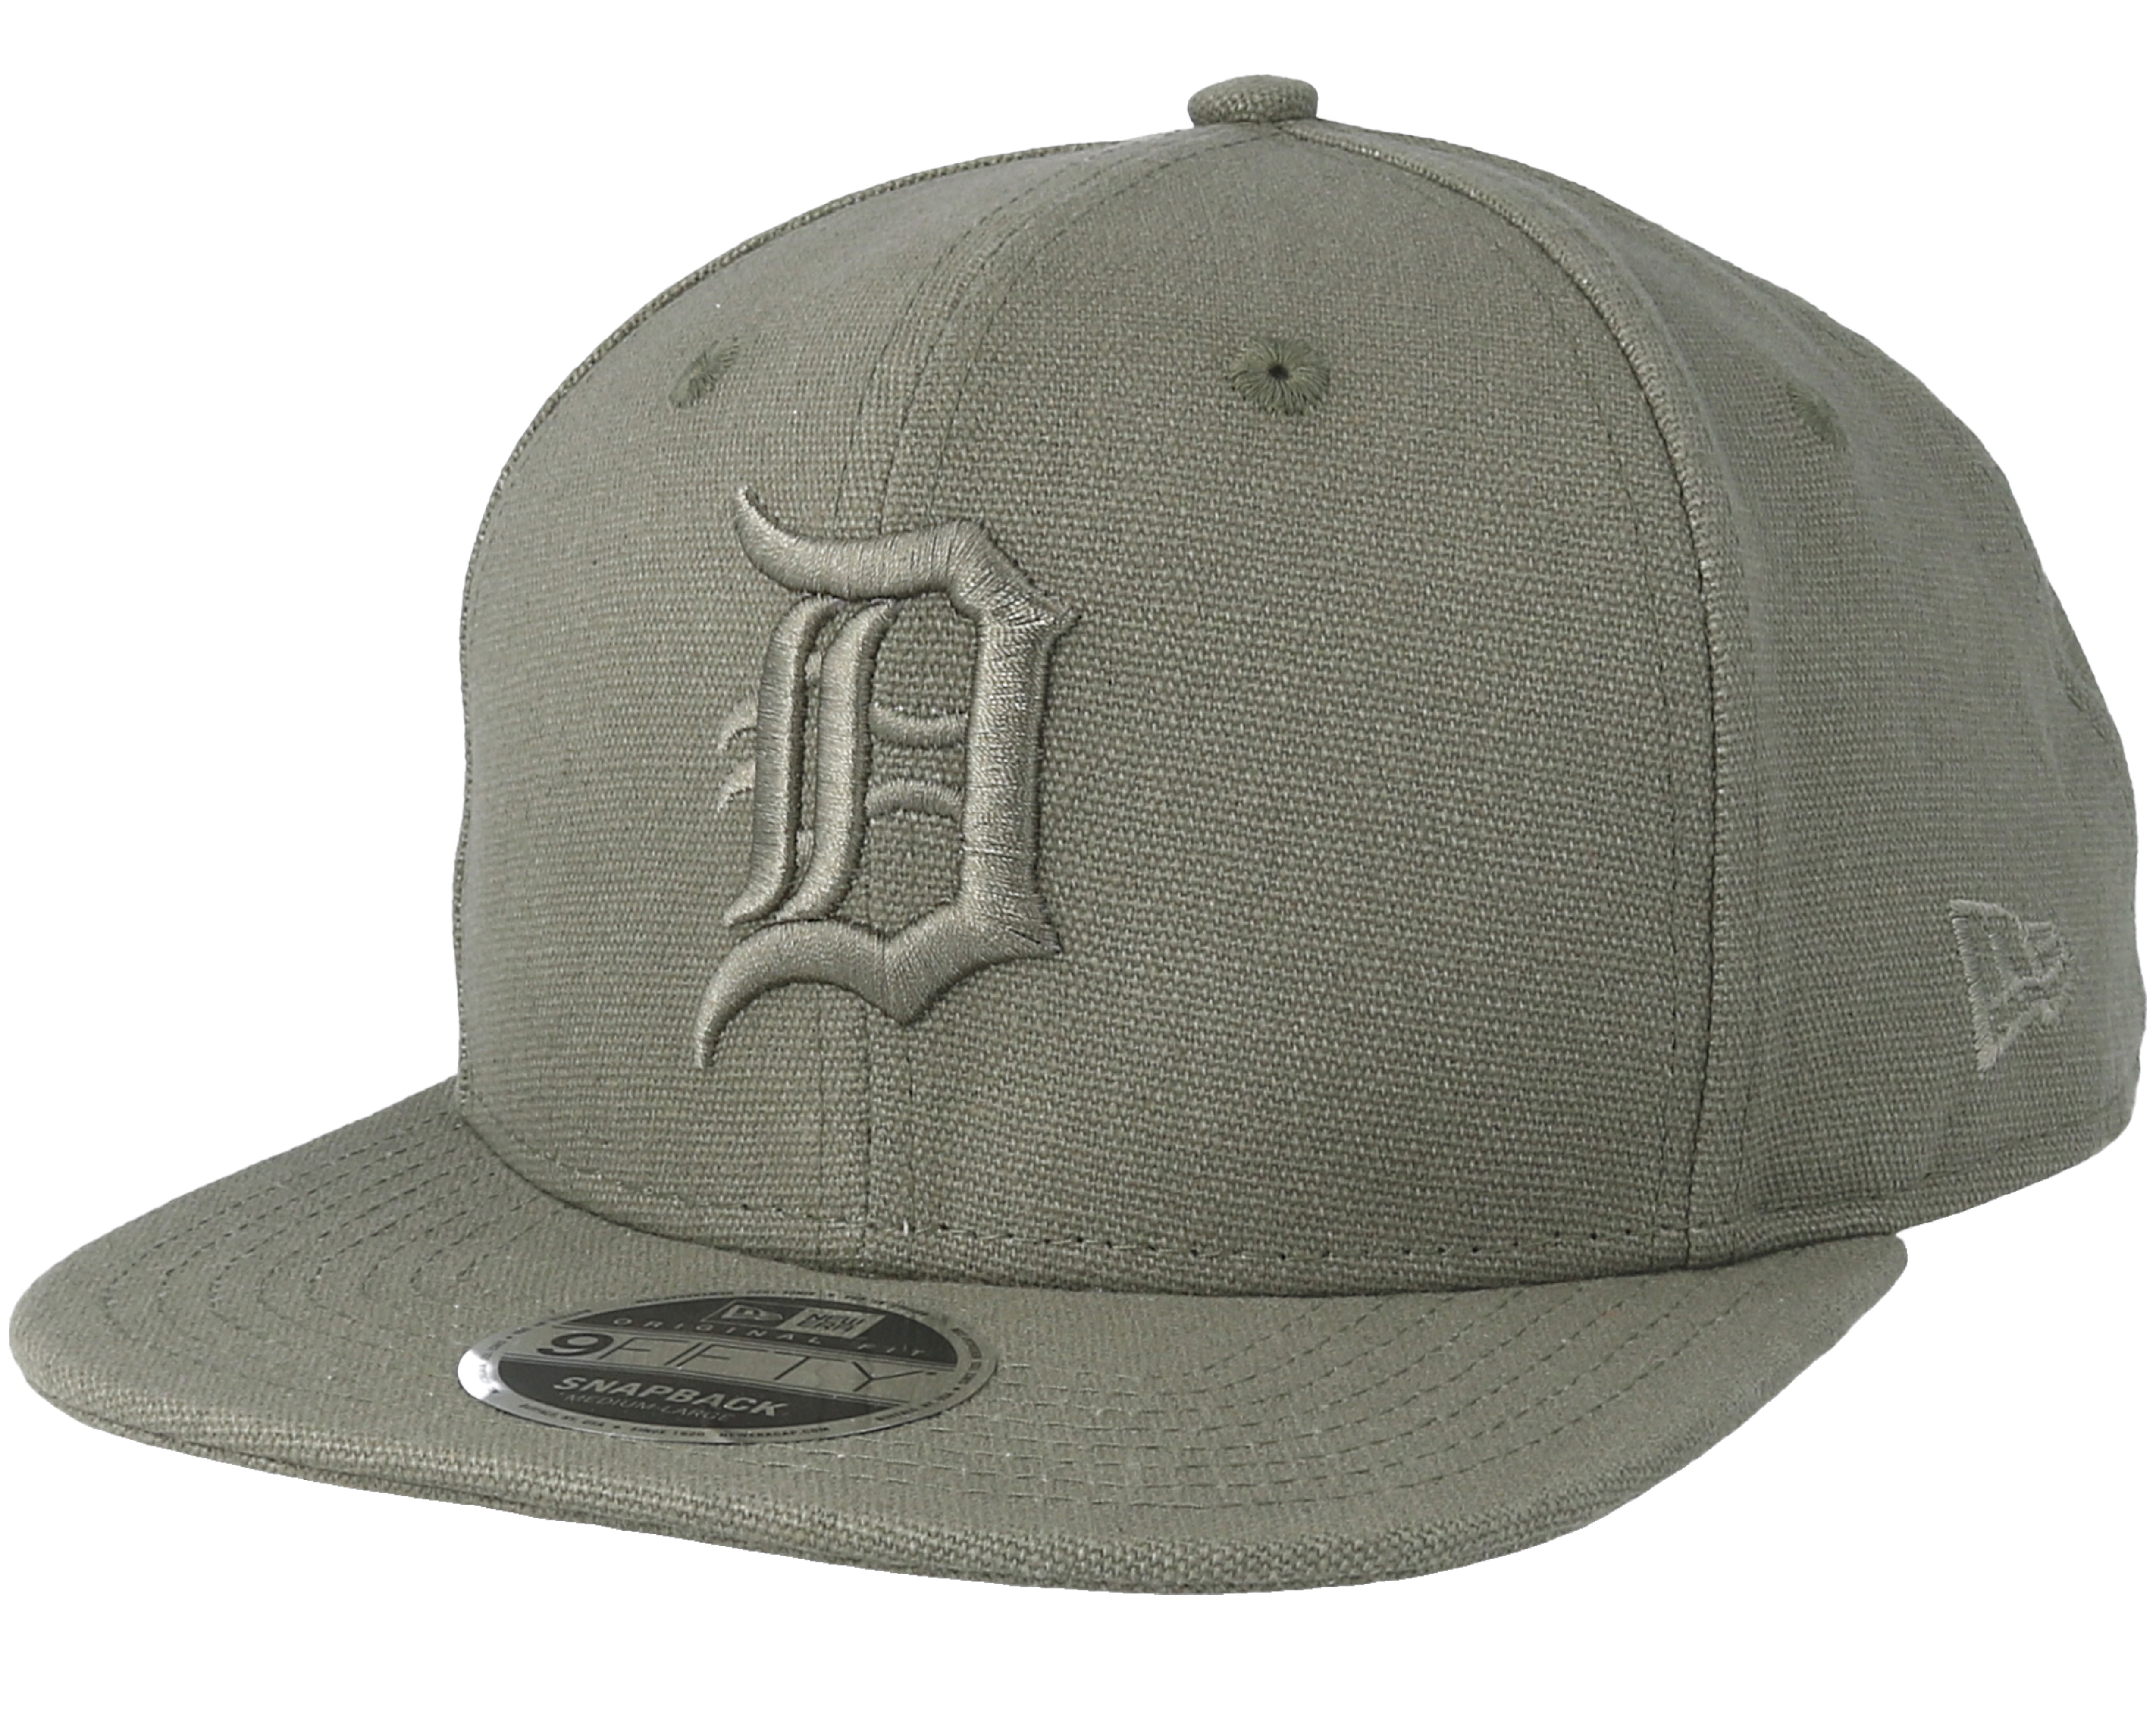 Detroit Tigers MLB Olive 9FIFTY Snapback Hat in Green/Olive by New Era